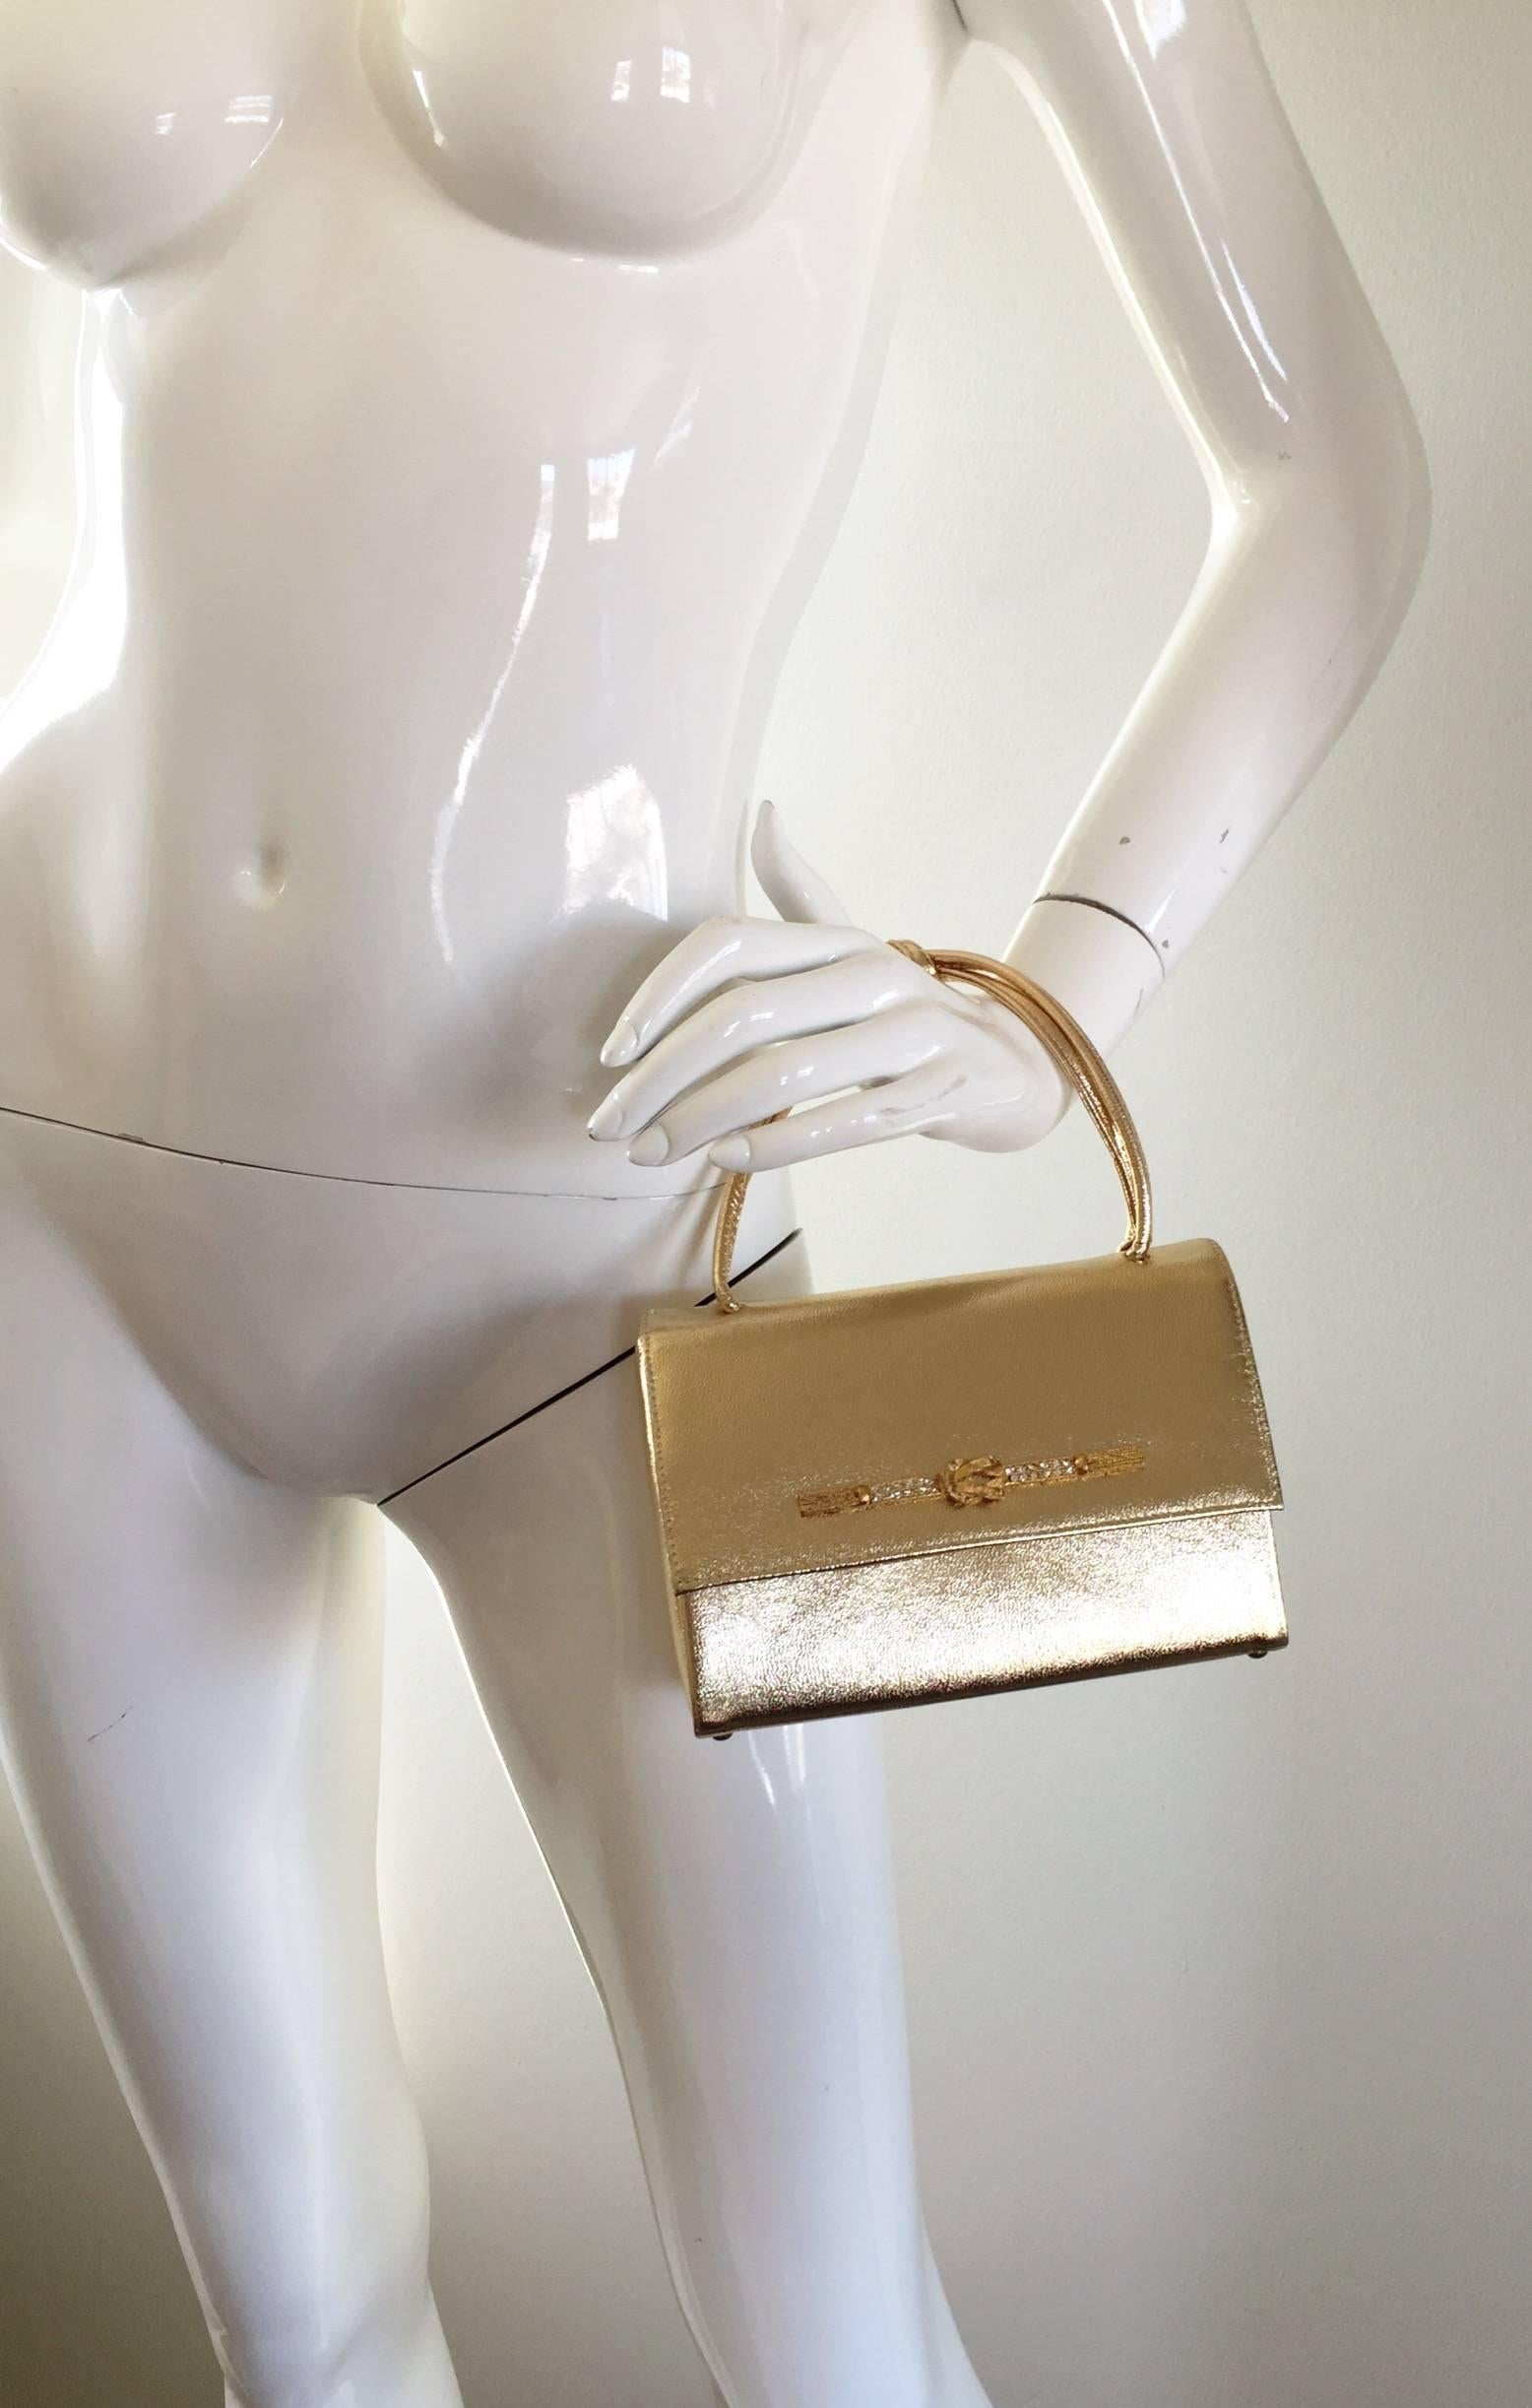 Exquisite 1950s vintage gold leather metallic handbag, with matching gloves! Extraordinary construction, with heavy attention to detail. Features a knotted handle and a gold bar across the front, encrusted with rhinestones. Four feet on the bottom